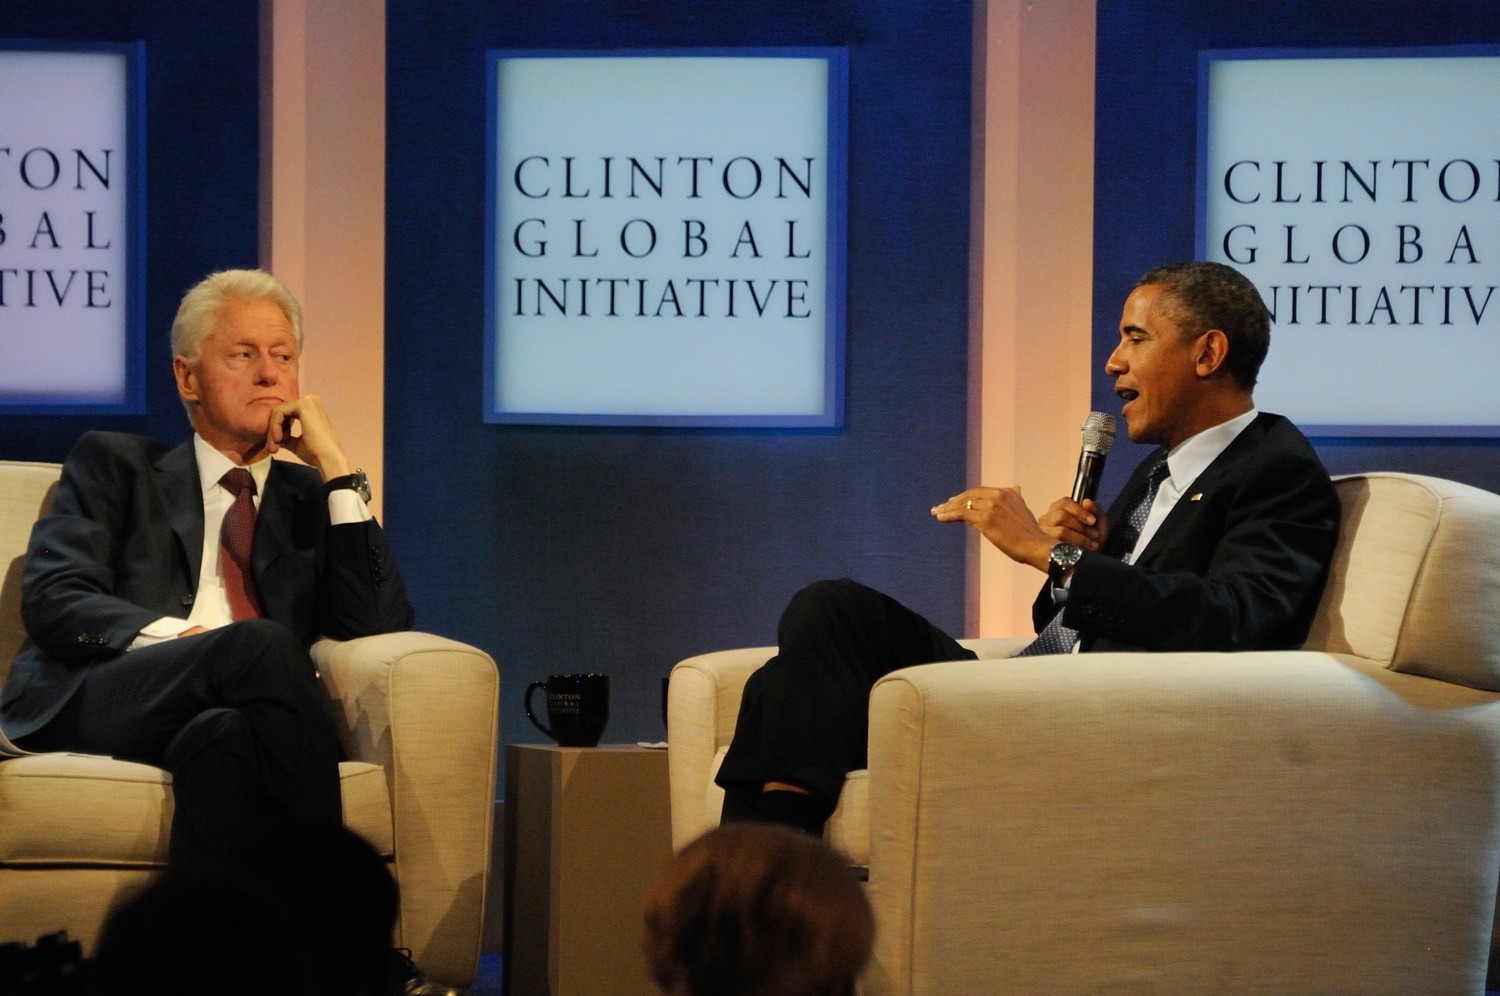 President Barack Obama with President Bill Clinton at 2013 Clinton Global Initiative, New York City, discussing health reform, Obamacare© 2017 Karen Rubin/news-photos-features.com